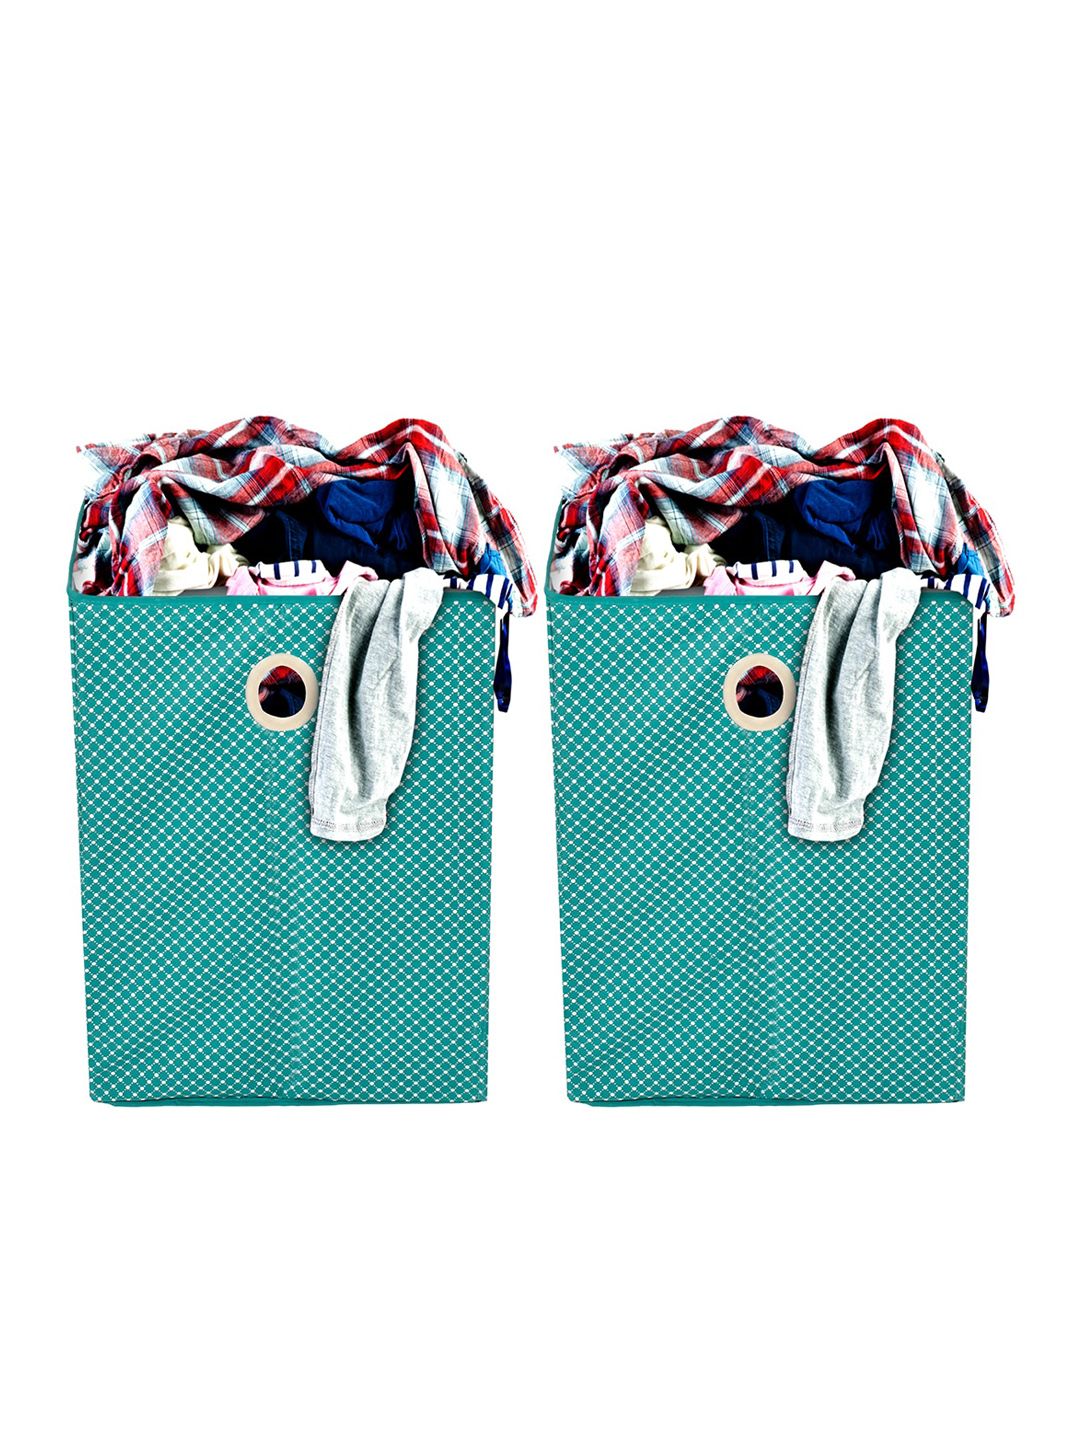 Kuber Industries Set Of 2 Green & White Printed Cotton Laundry Bag With Handles Price in India